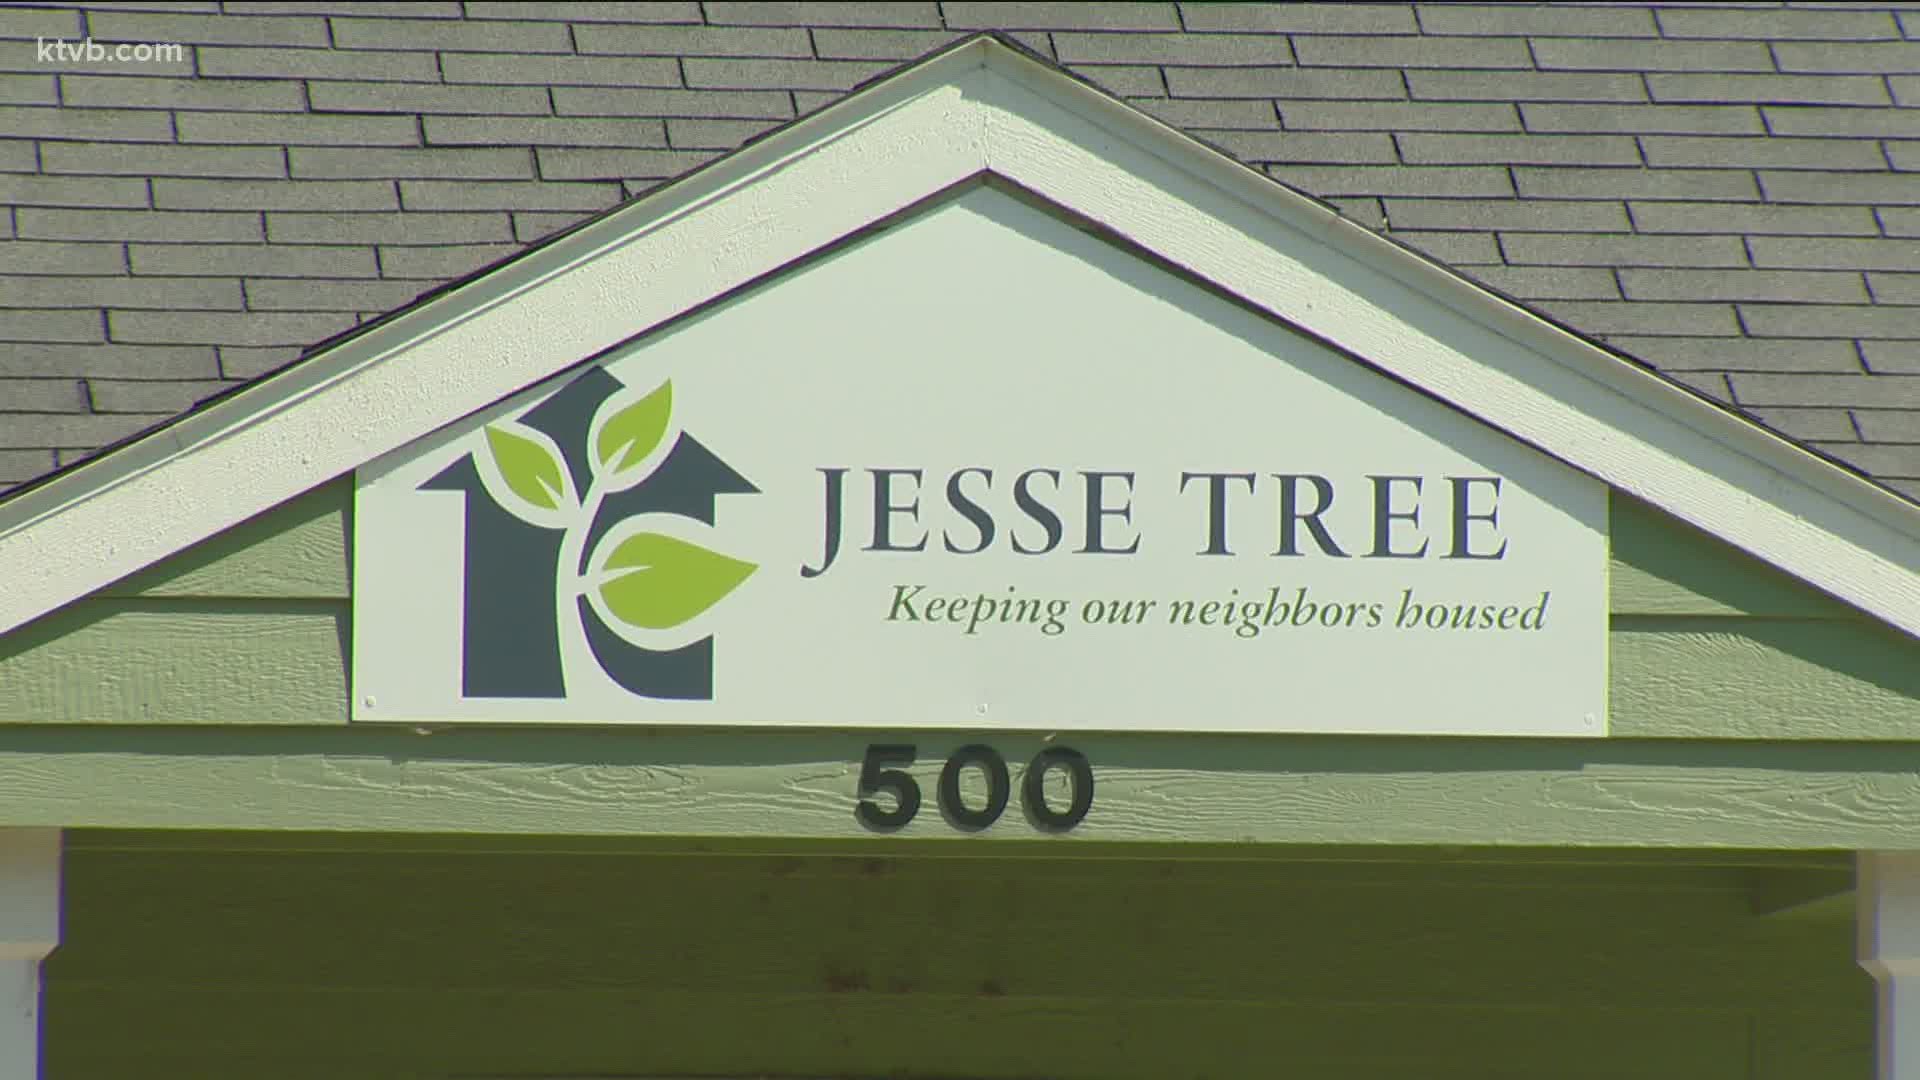 Local organizations like CATCH and Jesse Tree have seen a significant increase in those facing homelessness, or on the verge of it, due to the coronavirus pandemic.